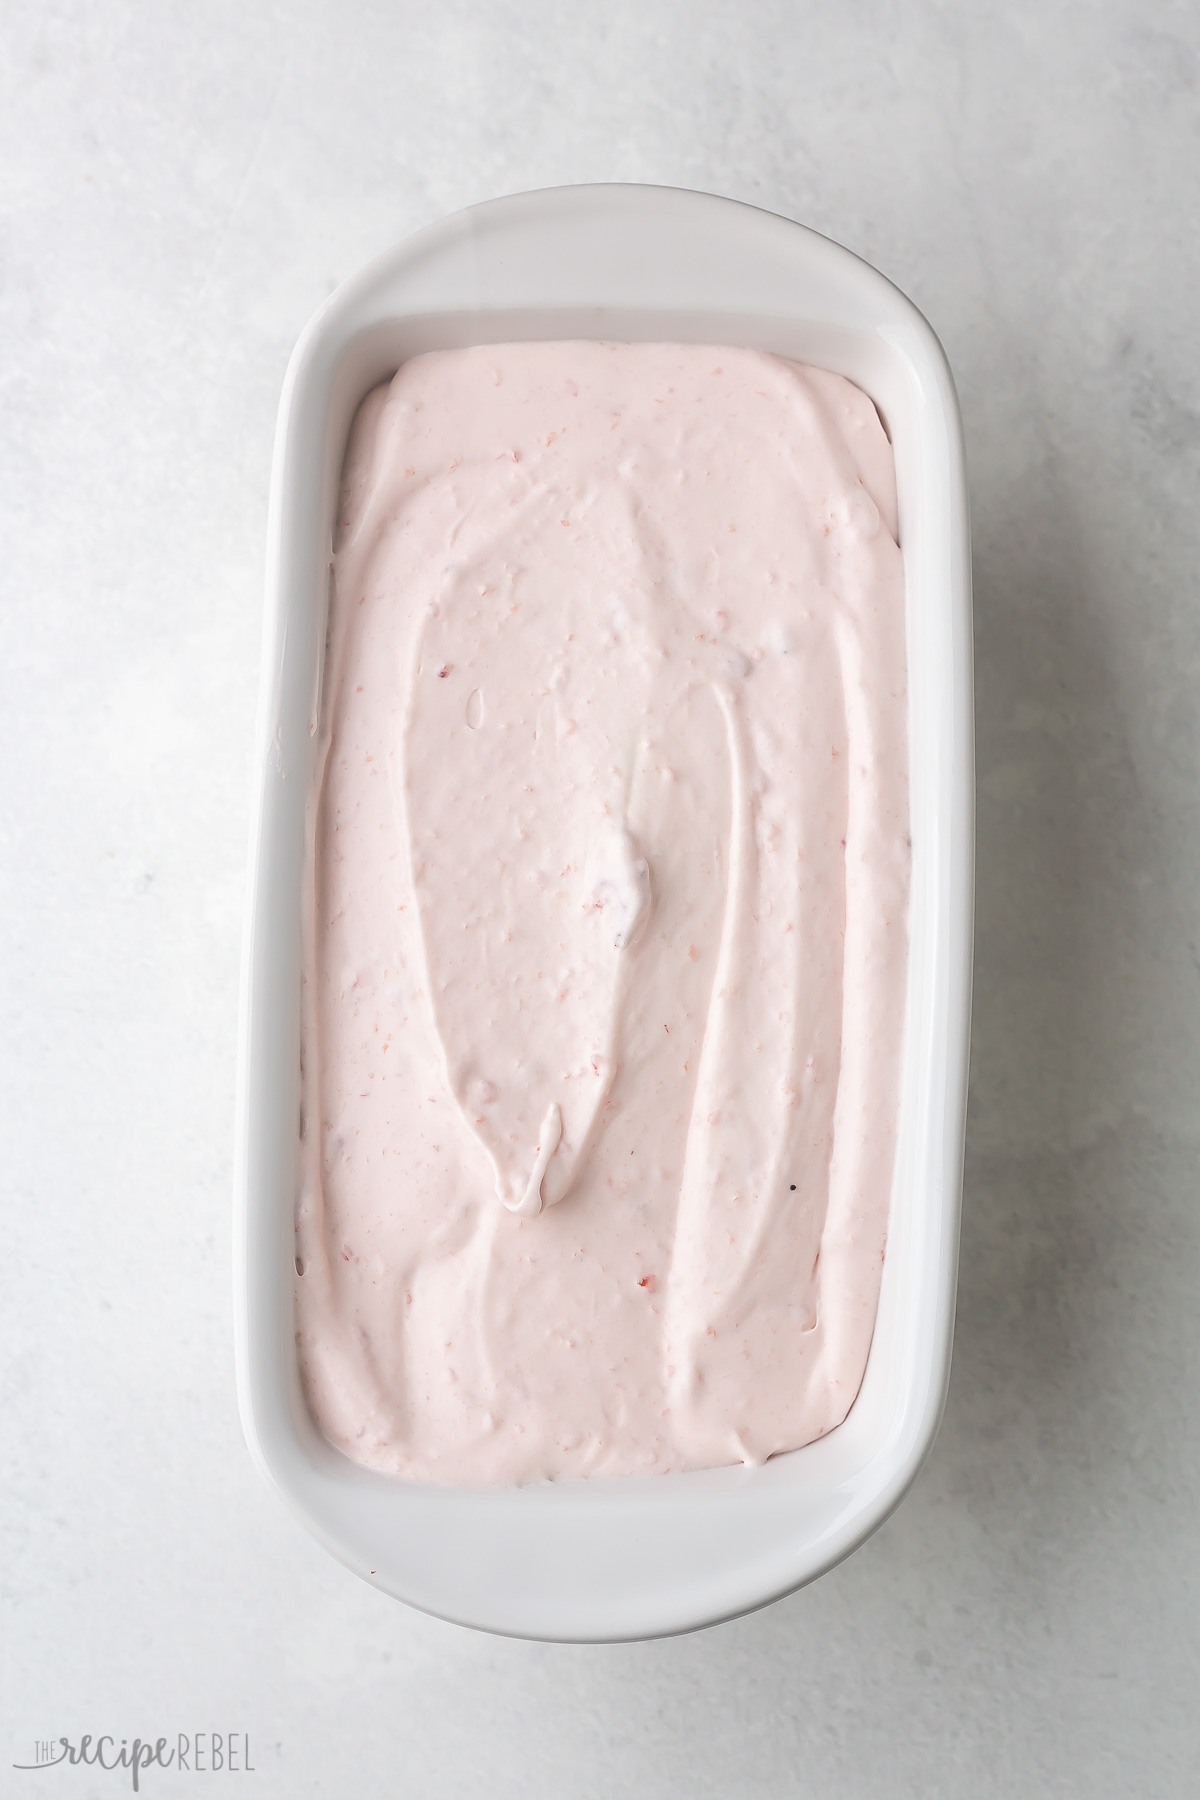 Top view of white rectangle dish with strawberry ice cream mixture in it.